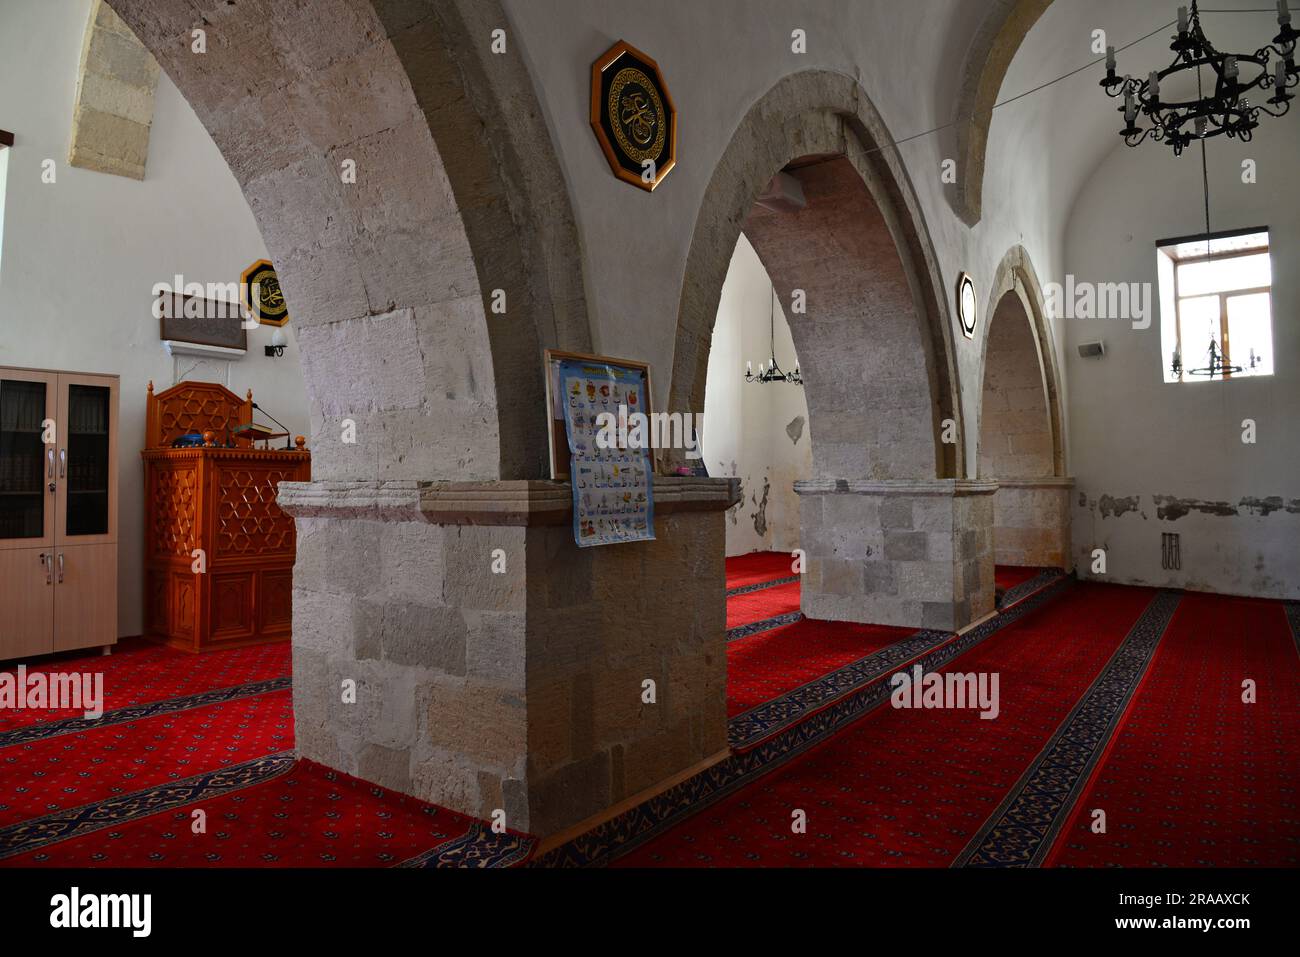 Located in Tunceli, Turkey, the Suleymaniye Mosque was built in the 16th century. Stock Photo